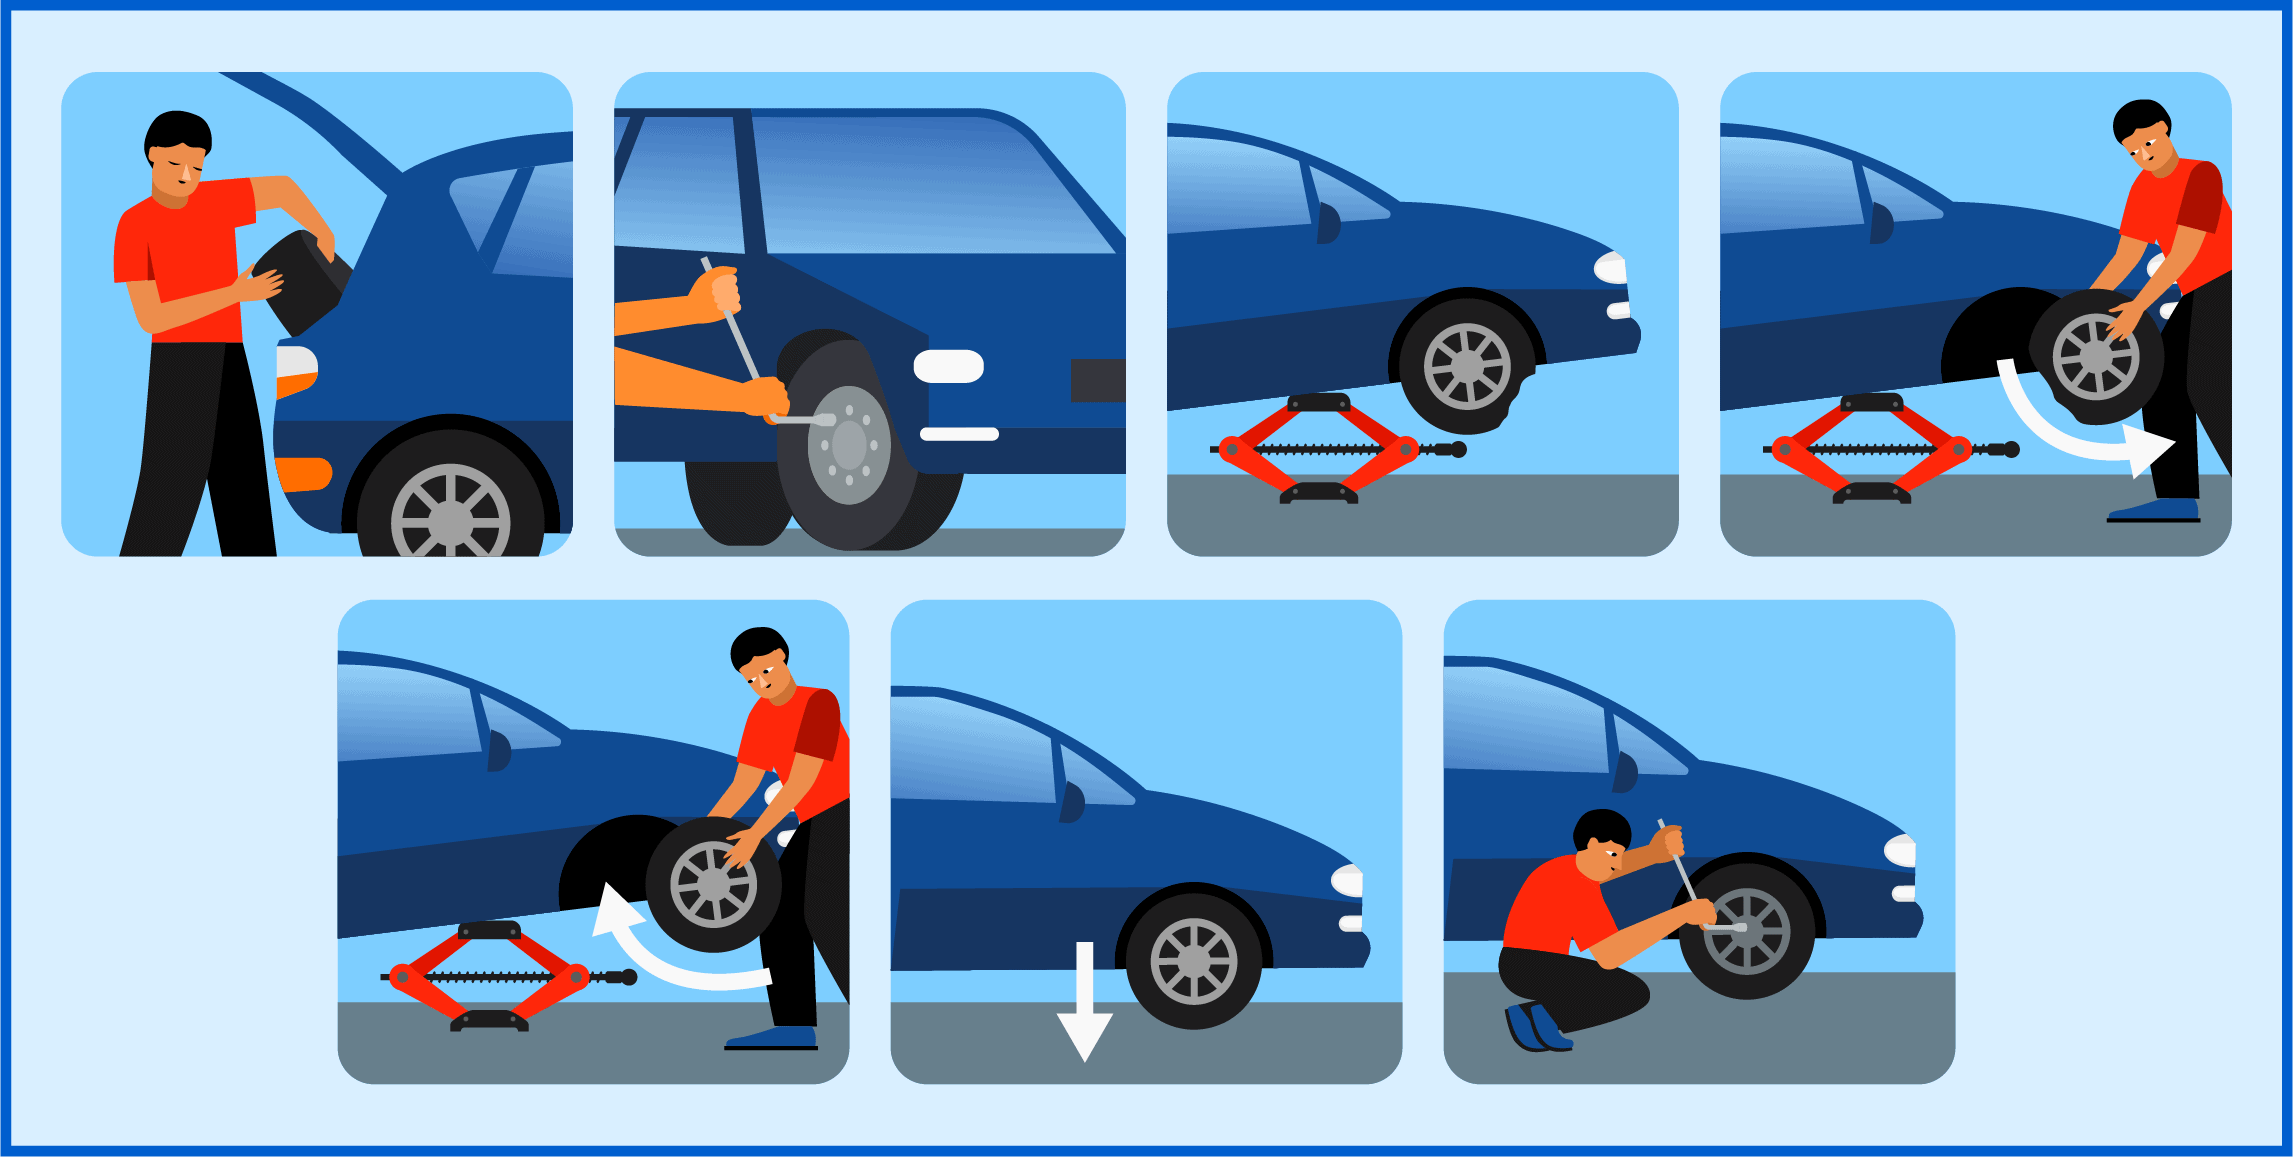 Once You’re Parked Safely – How to Change A Tire